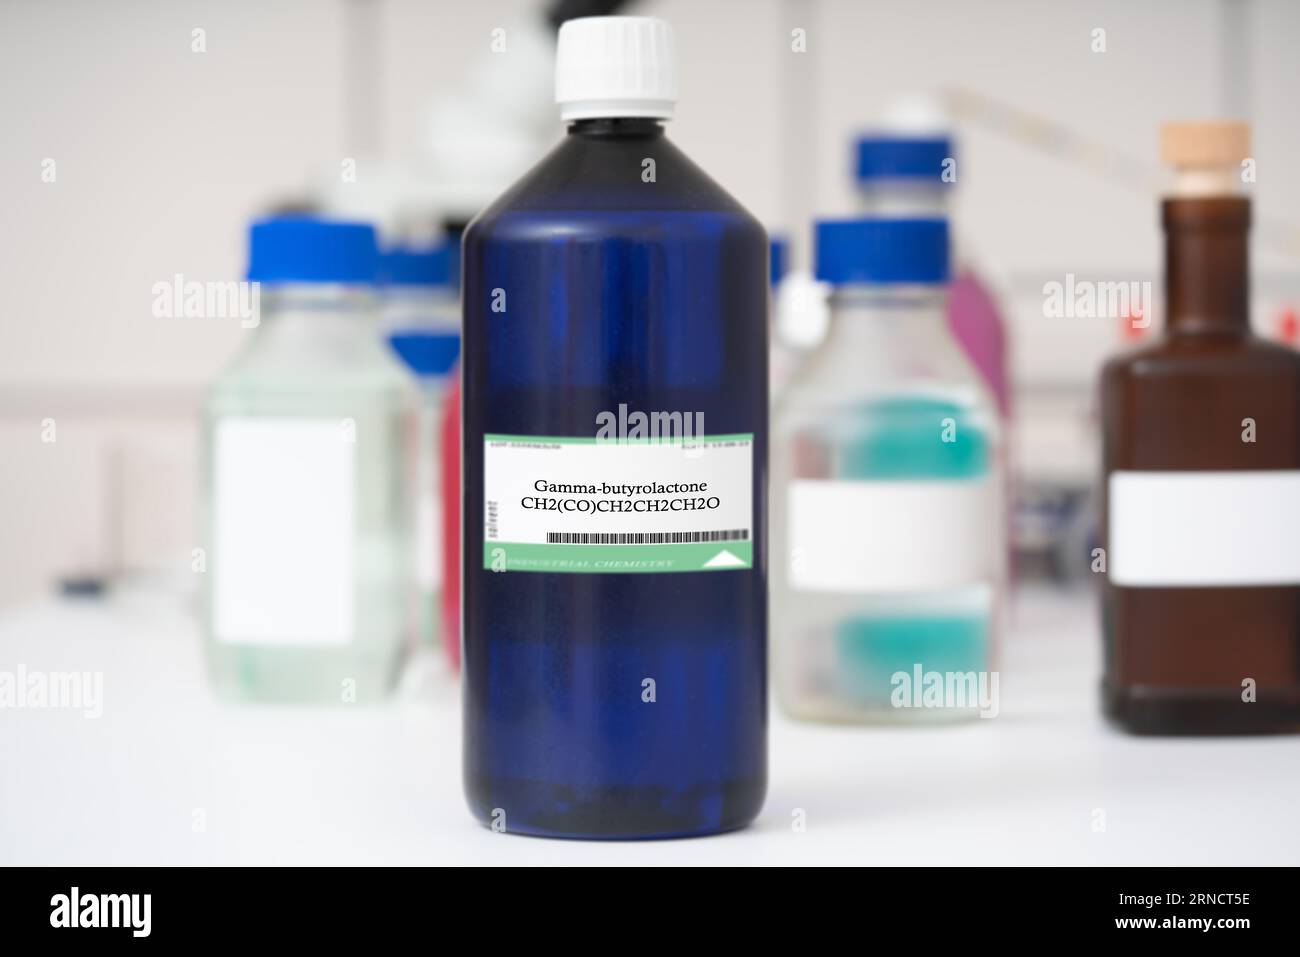 Gamma-butyrolactone A colorless, hygroscopic liquid used as a solvent and in the production of various chemicals, such as pesticides and pharmaceutica Stock Photo